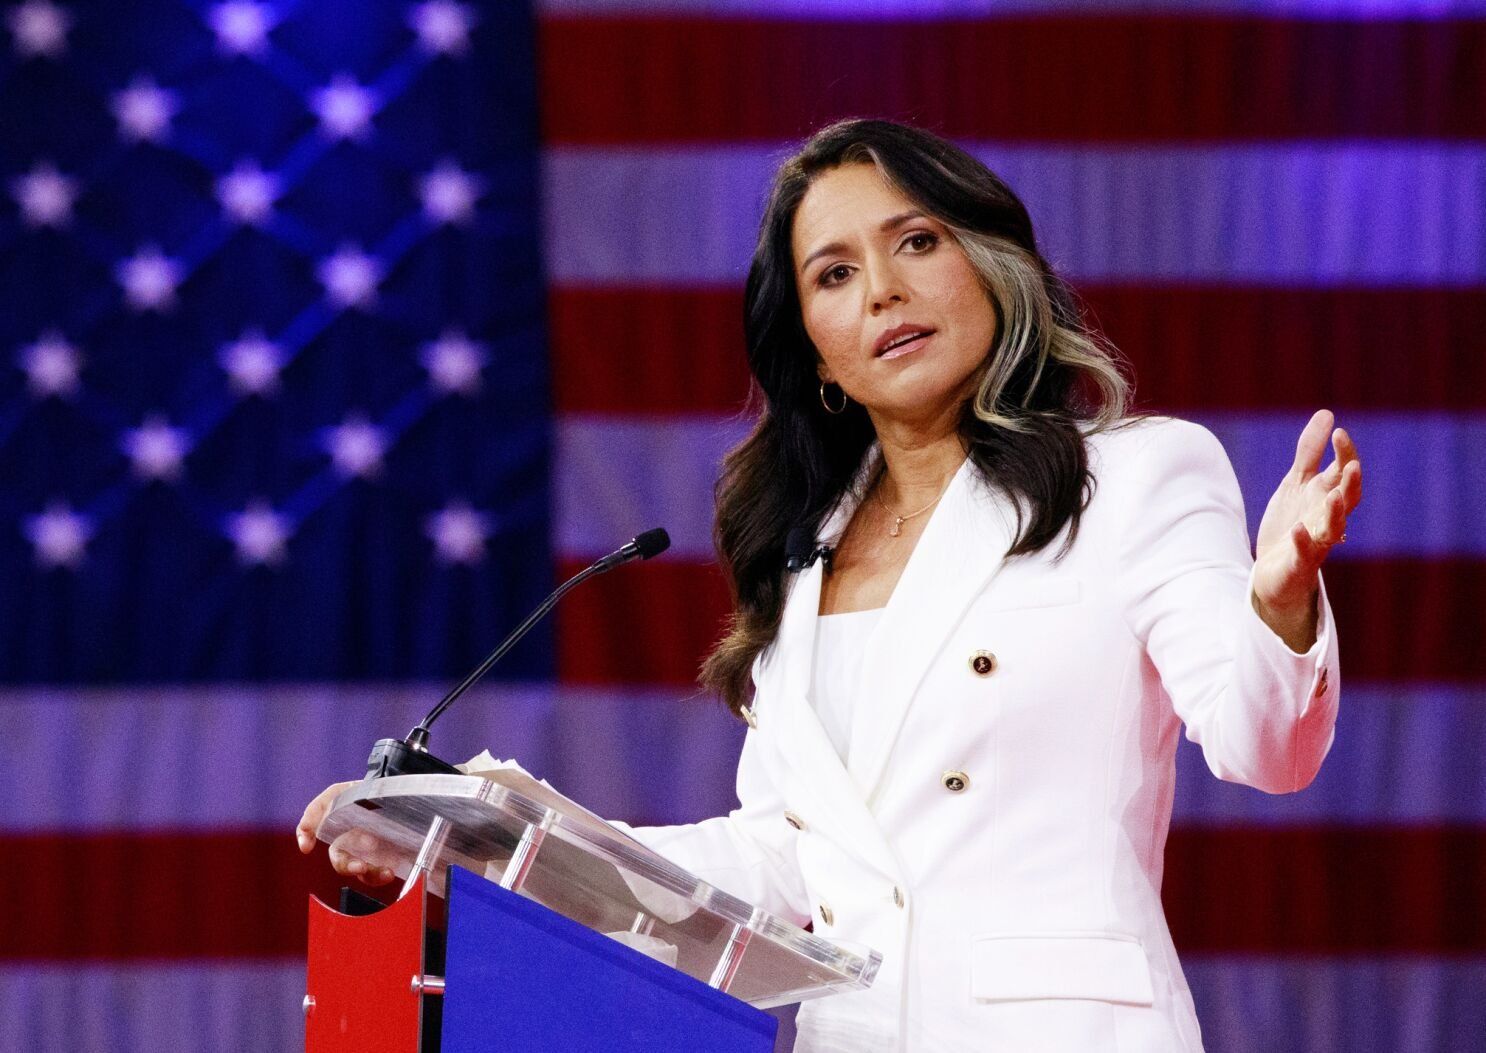 Tulsi Gabbard hailed on social media for grilling George Santos in interview